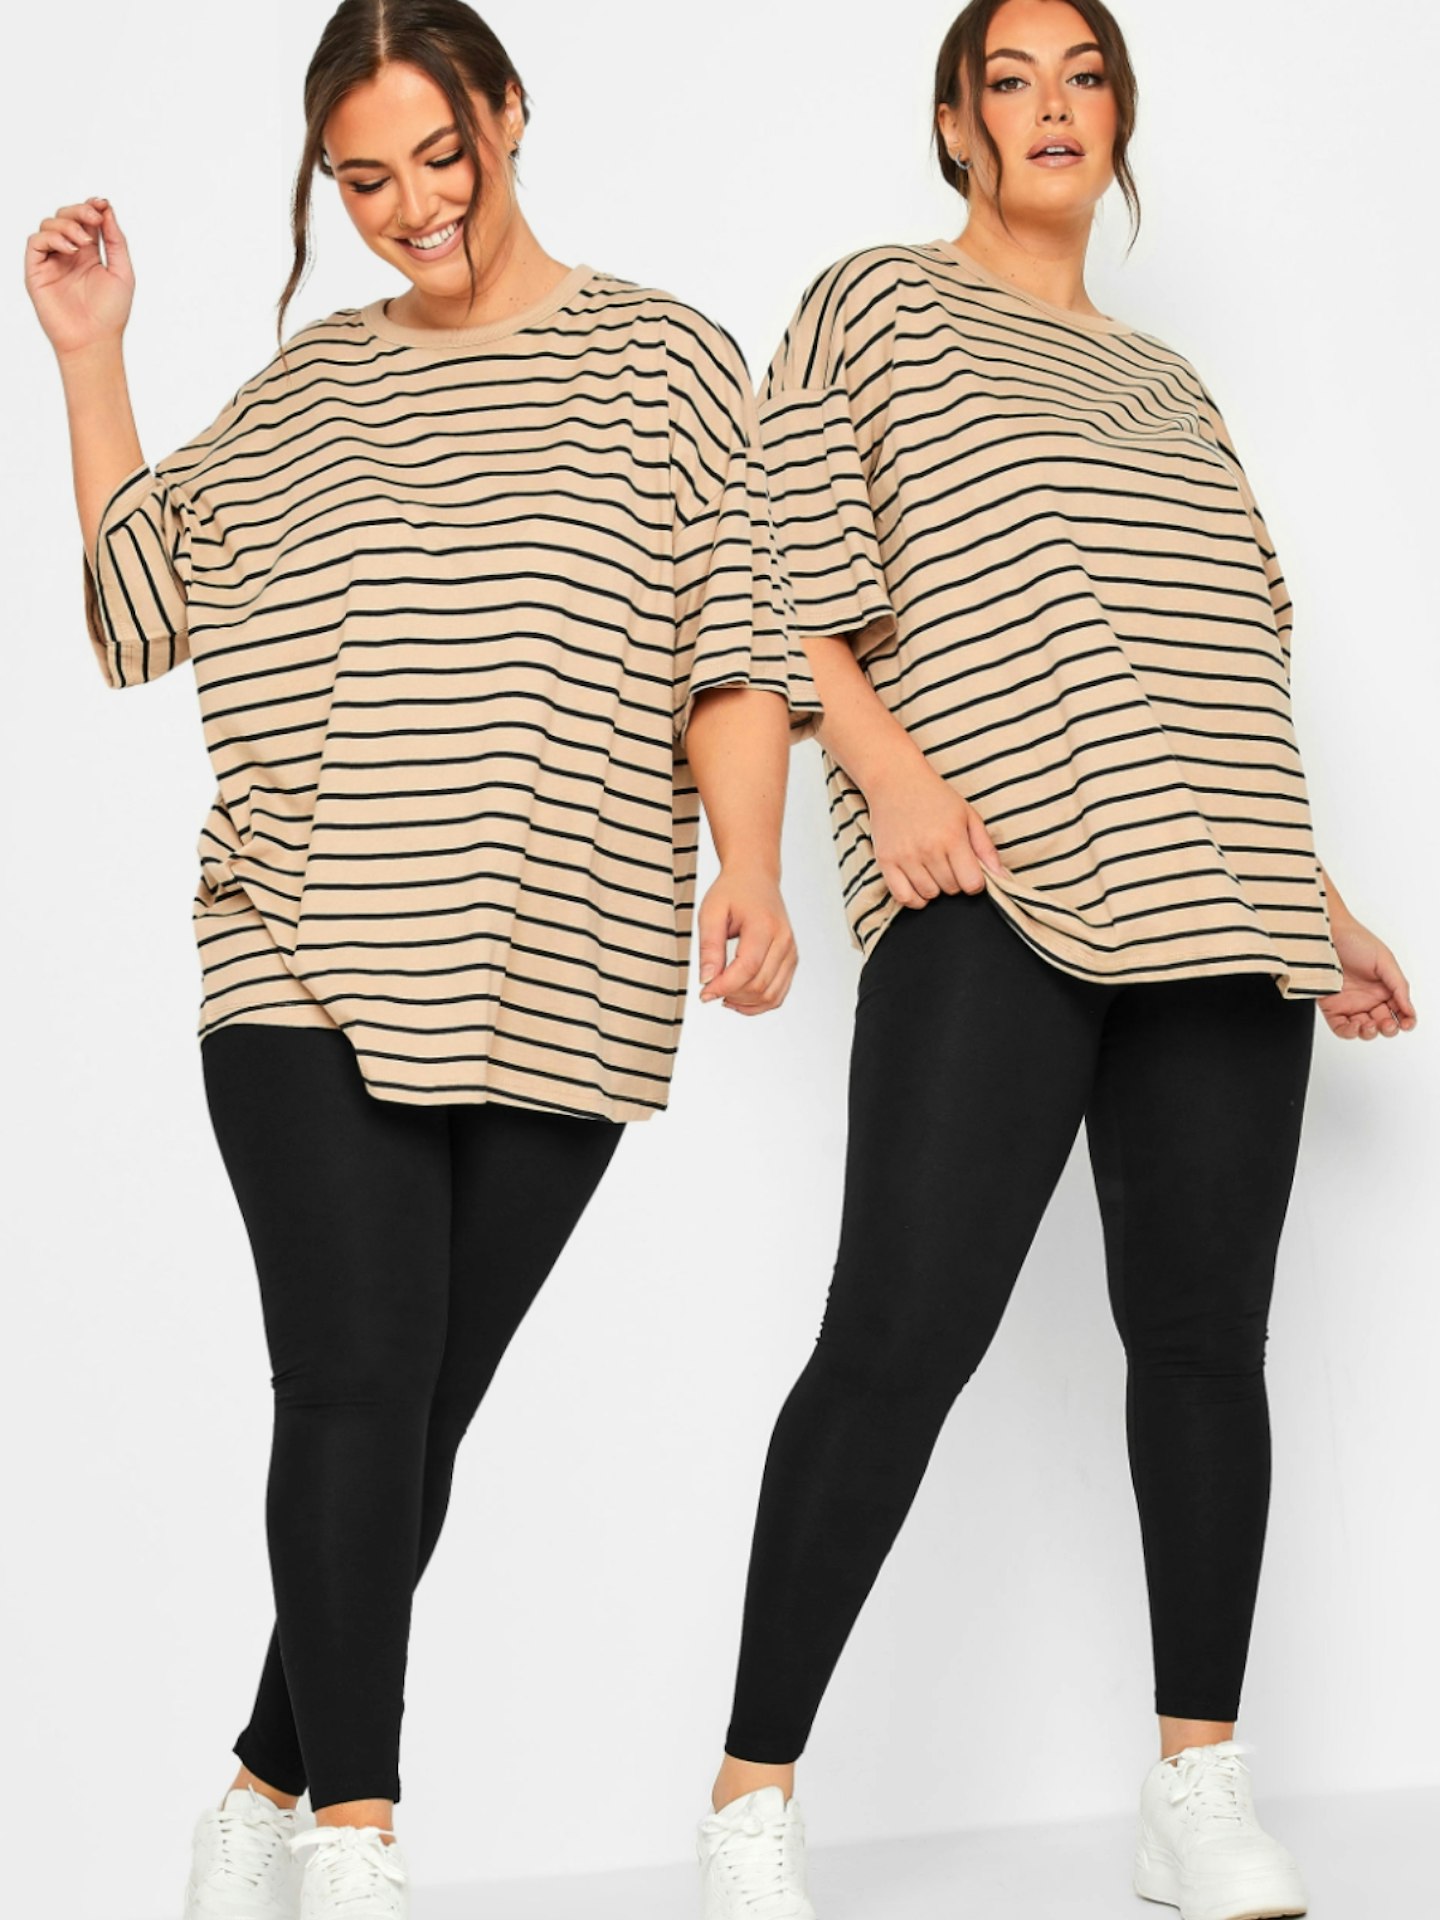 Plus Size Outfits With Leggings 5 best